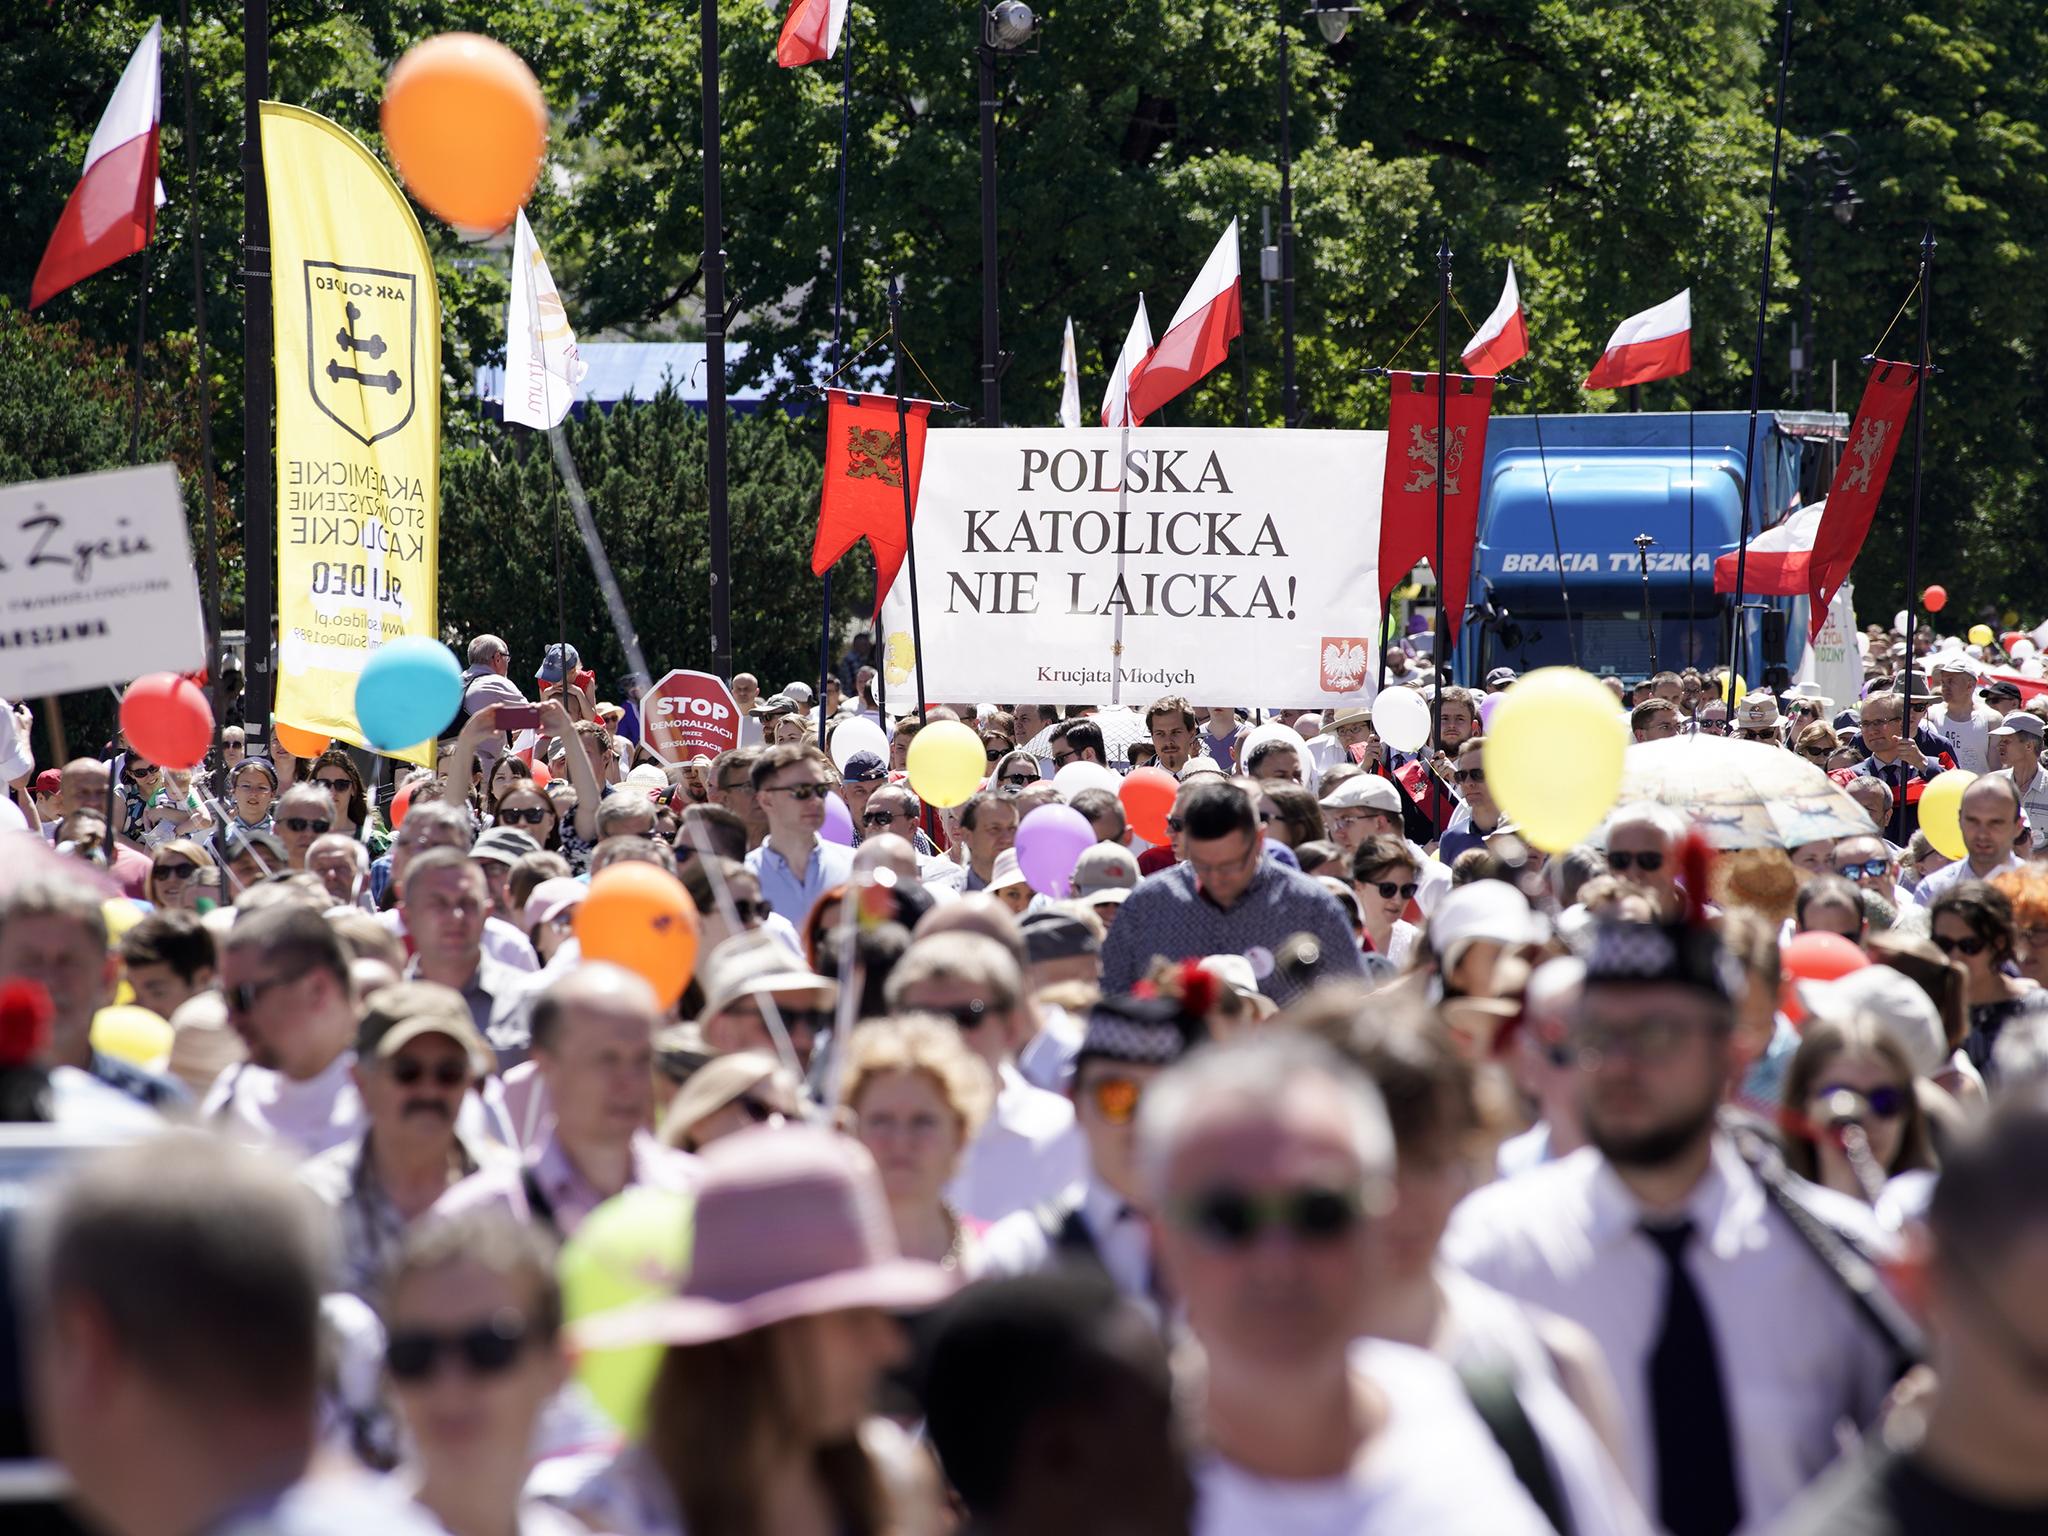 Campaigners in Warsaw in the ‘March for Life and Family’ promote the government’s conservative, anti-LGBT+ views